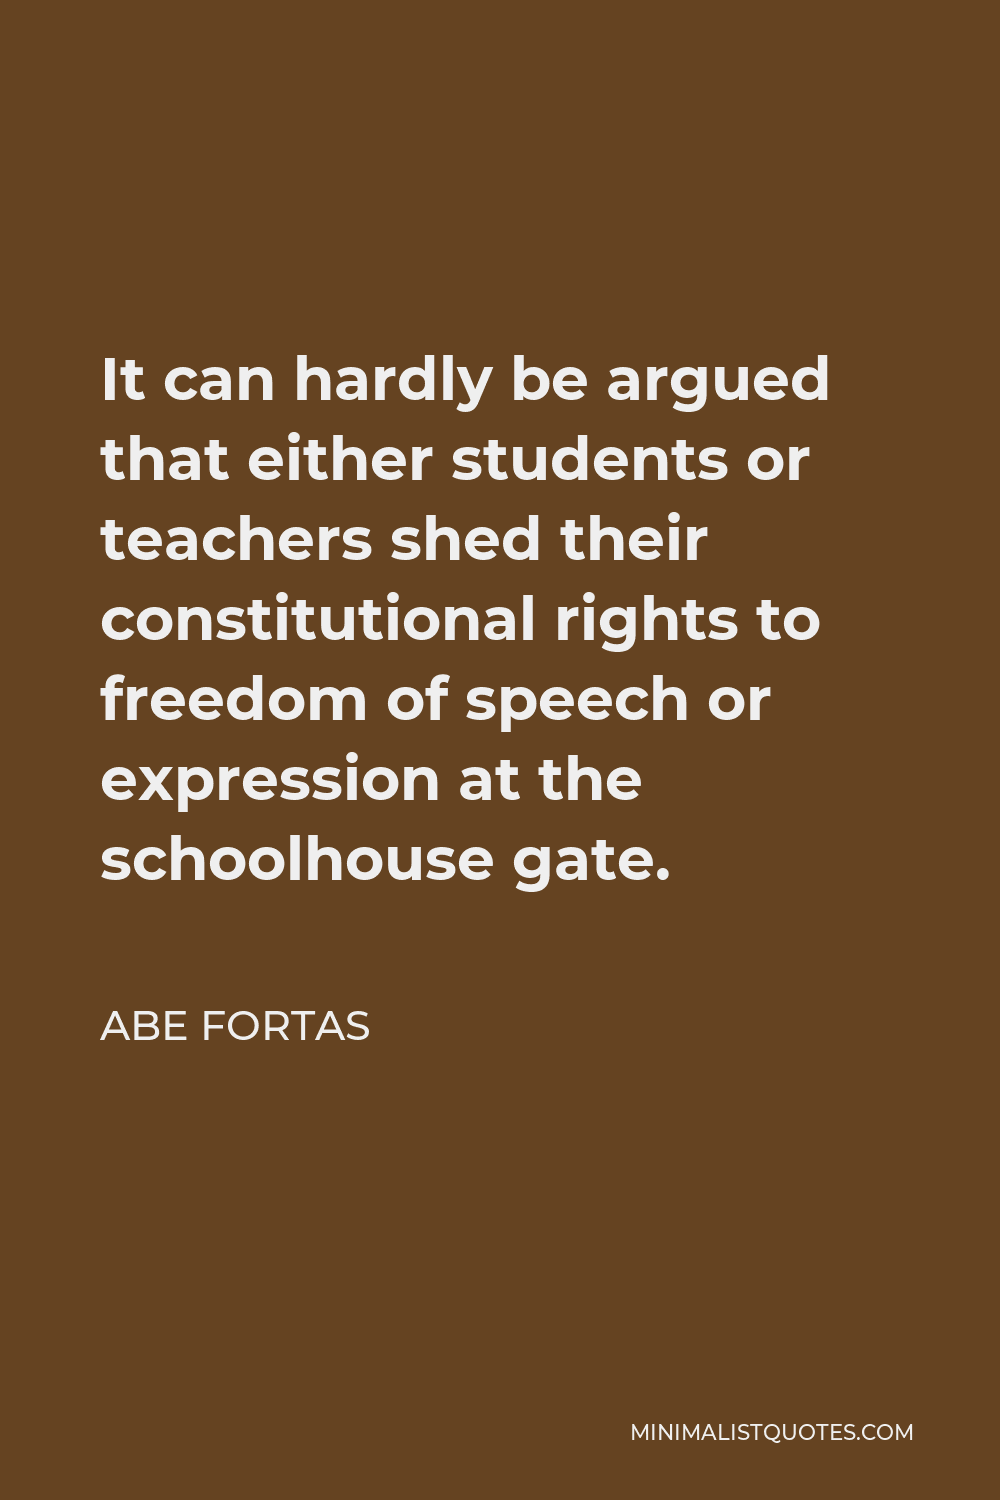 Abe Fortas Quote - It can hardly be argued that either students or teachers shed their constitutional rights to freedom of speech or expression at the schoolhouse gate.